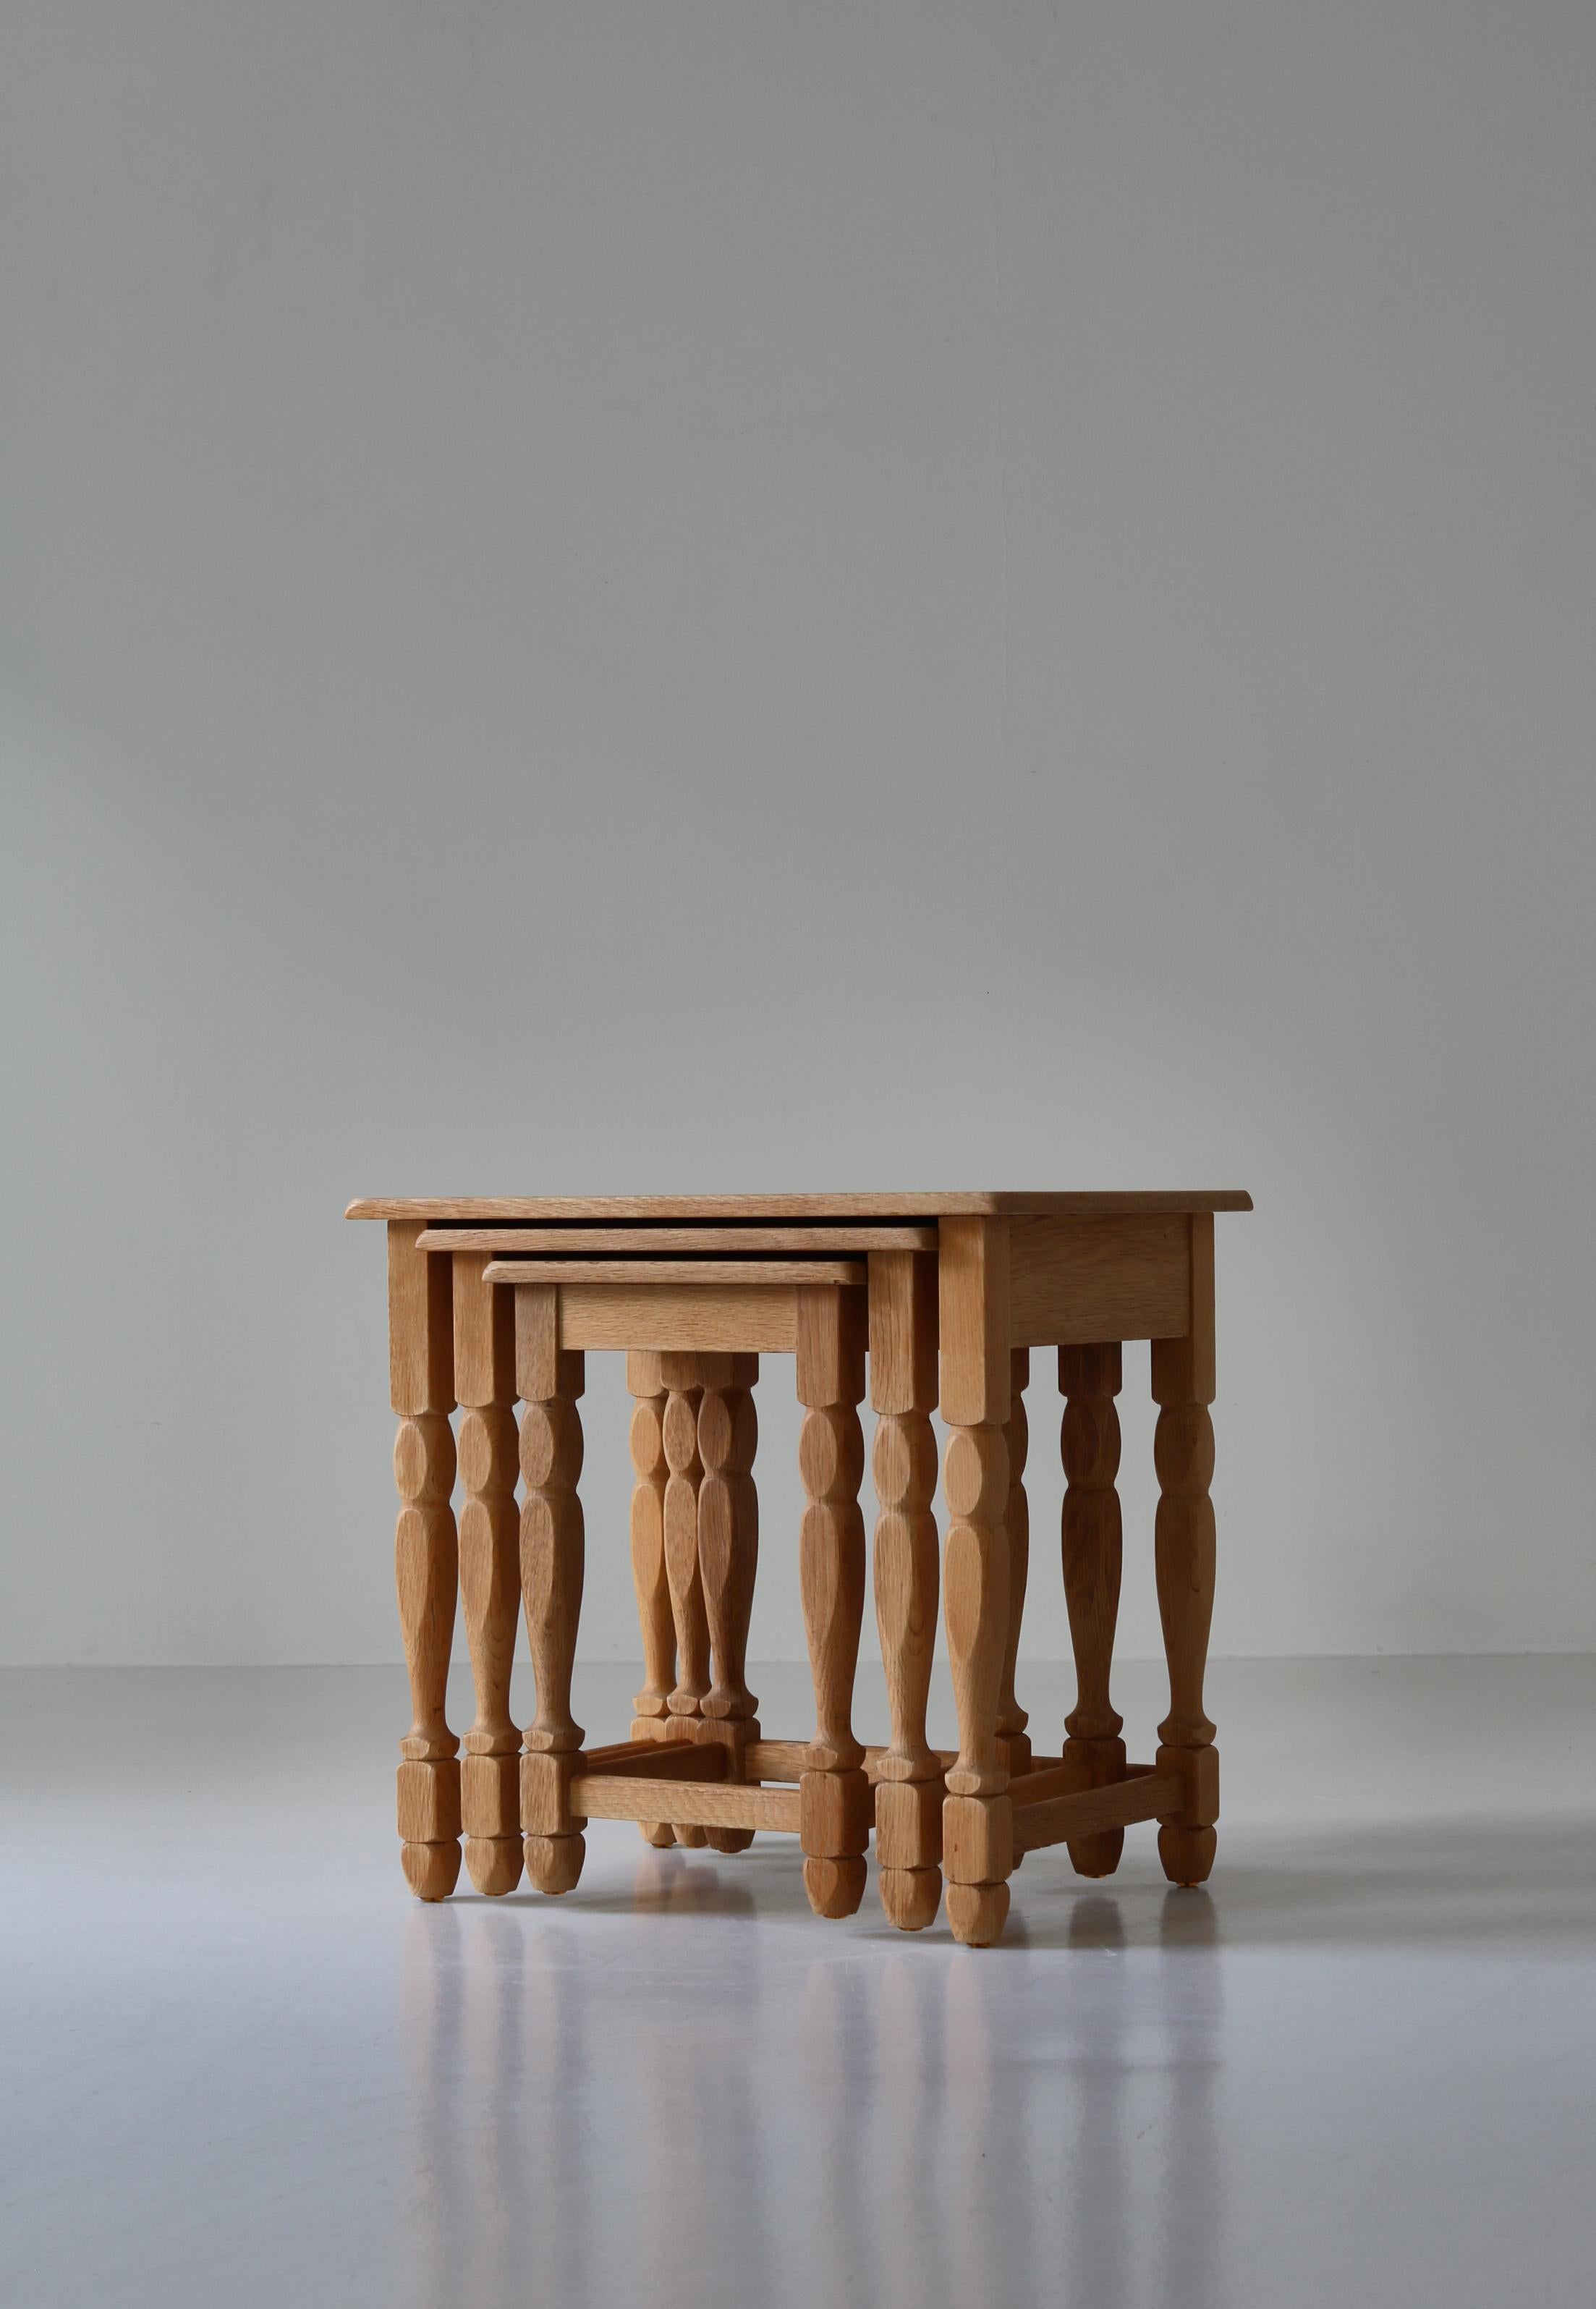 Set of 3 nesting tables in solid quartersawn oak with beautiful grain and patina. The tables were designed by Henning Kjærnulf in the 1960s and manufactured at EG Kvalitetsmøbel, Denmark. The style is modern but with playful hints to historical